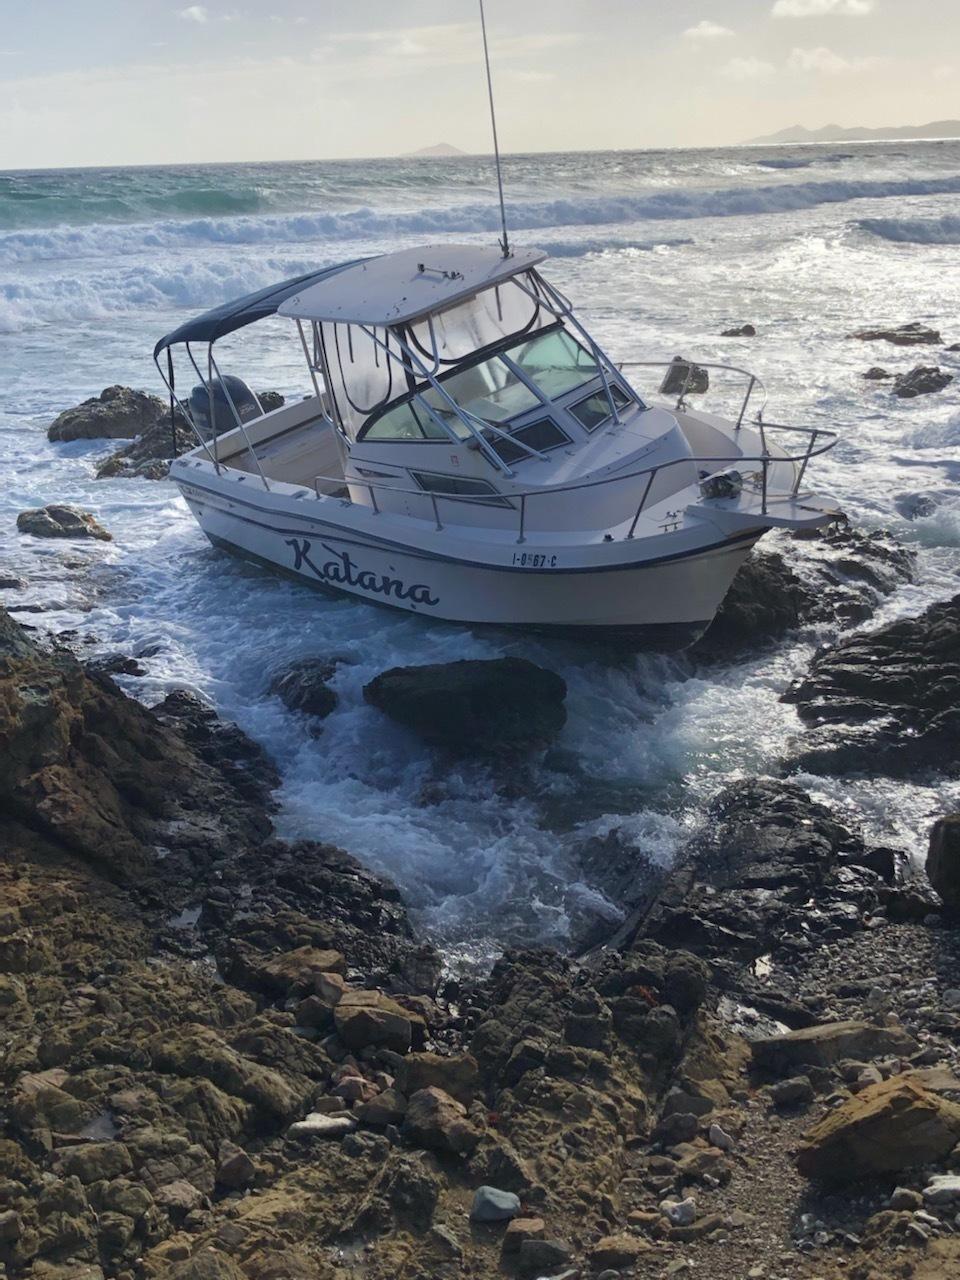 The vessel Katana sits on the rocks off Judith's Fancy, St. Croix, on Monday. Nine people were rescued from the boat on Sunday evening after it ran out of fuel, according to the Coast Guard. (Photo courtesy of U.S. Coast Guard District 7 PADET San Juan)